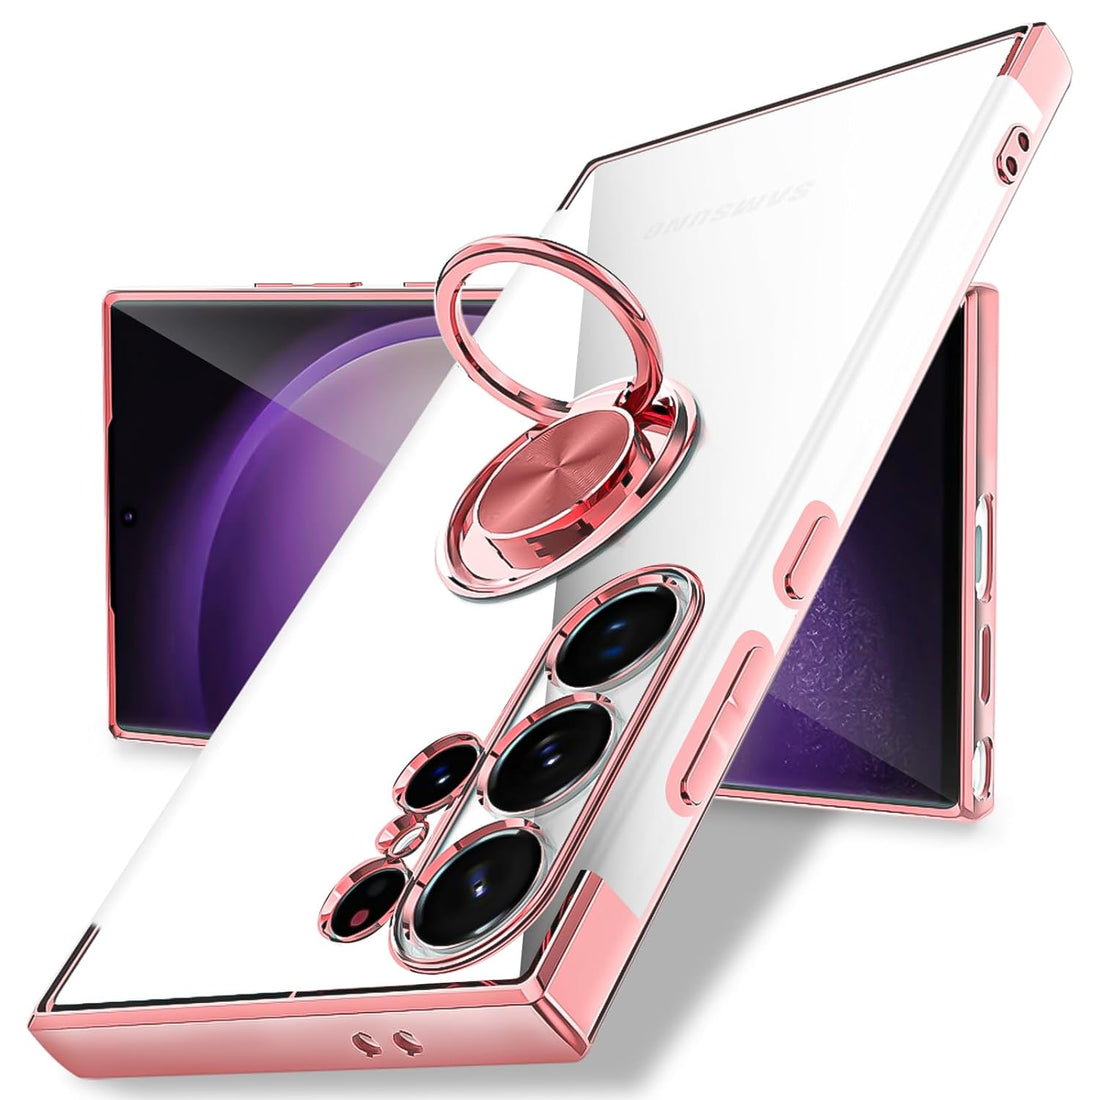 Tnarru Galaxy S24 Ultra Case with Magnetic Stand [360° Rotatable Ring Holder Kickstand] [Support Magnetic Car Mount] TPU Electroplated Shockproof Protection Galaxy S24 Ultra Phone Cover Pink